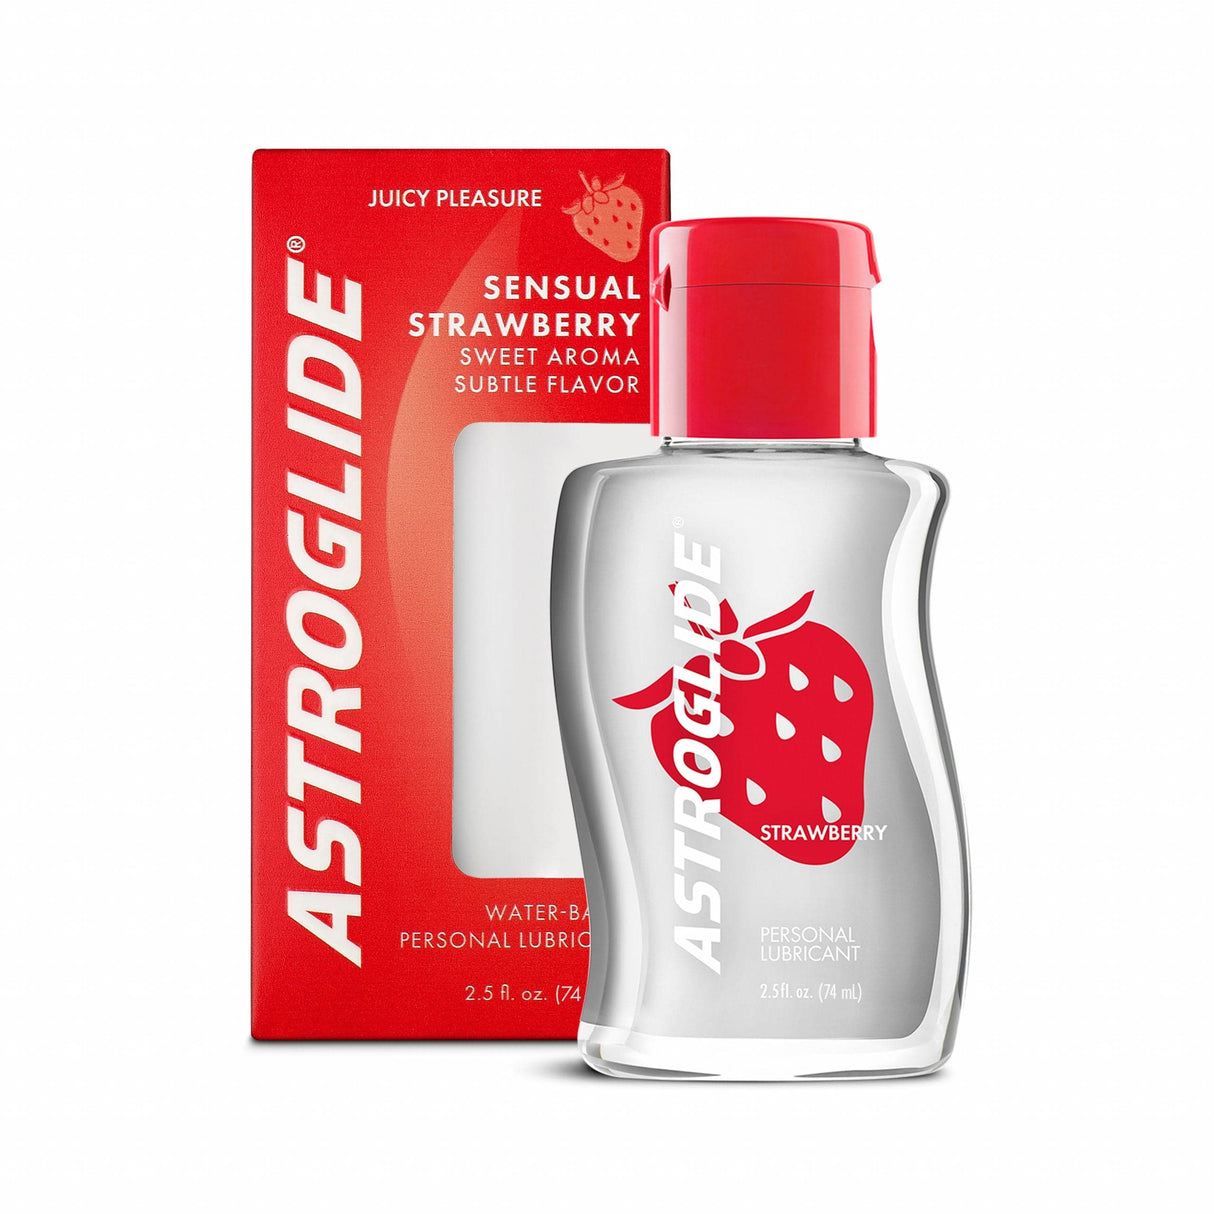 Astroglide - Sensual Strawberry Flavoured Water Based Personal Lubricant  74ml 015594010540 Lube (Water Based)